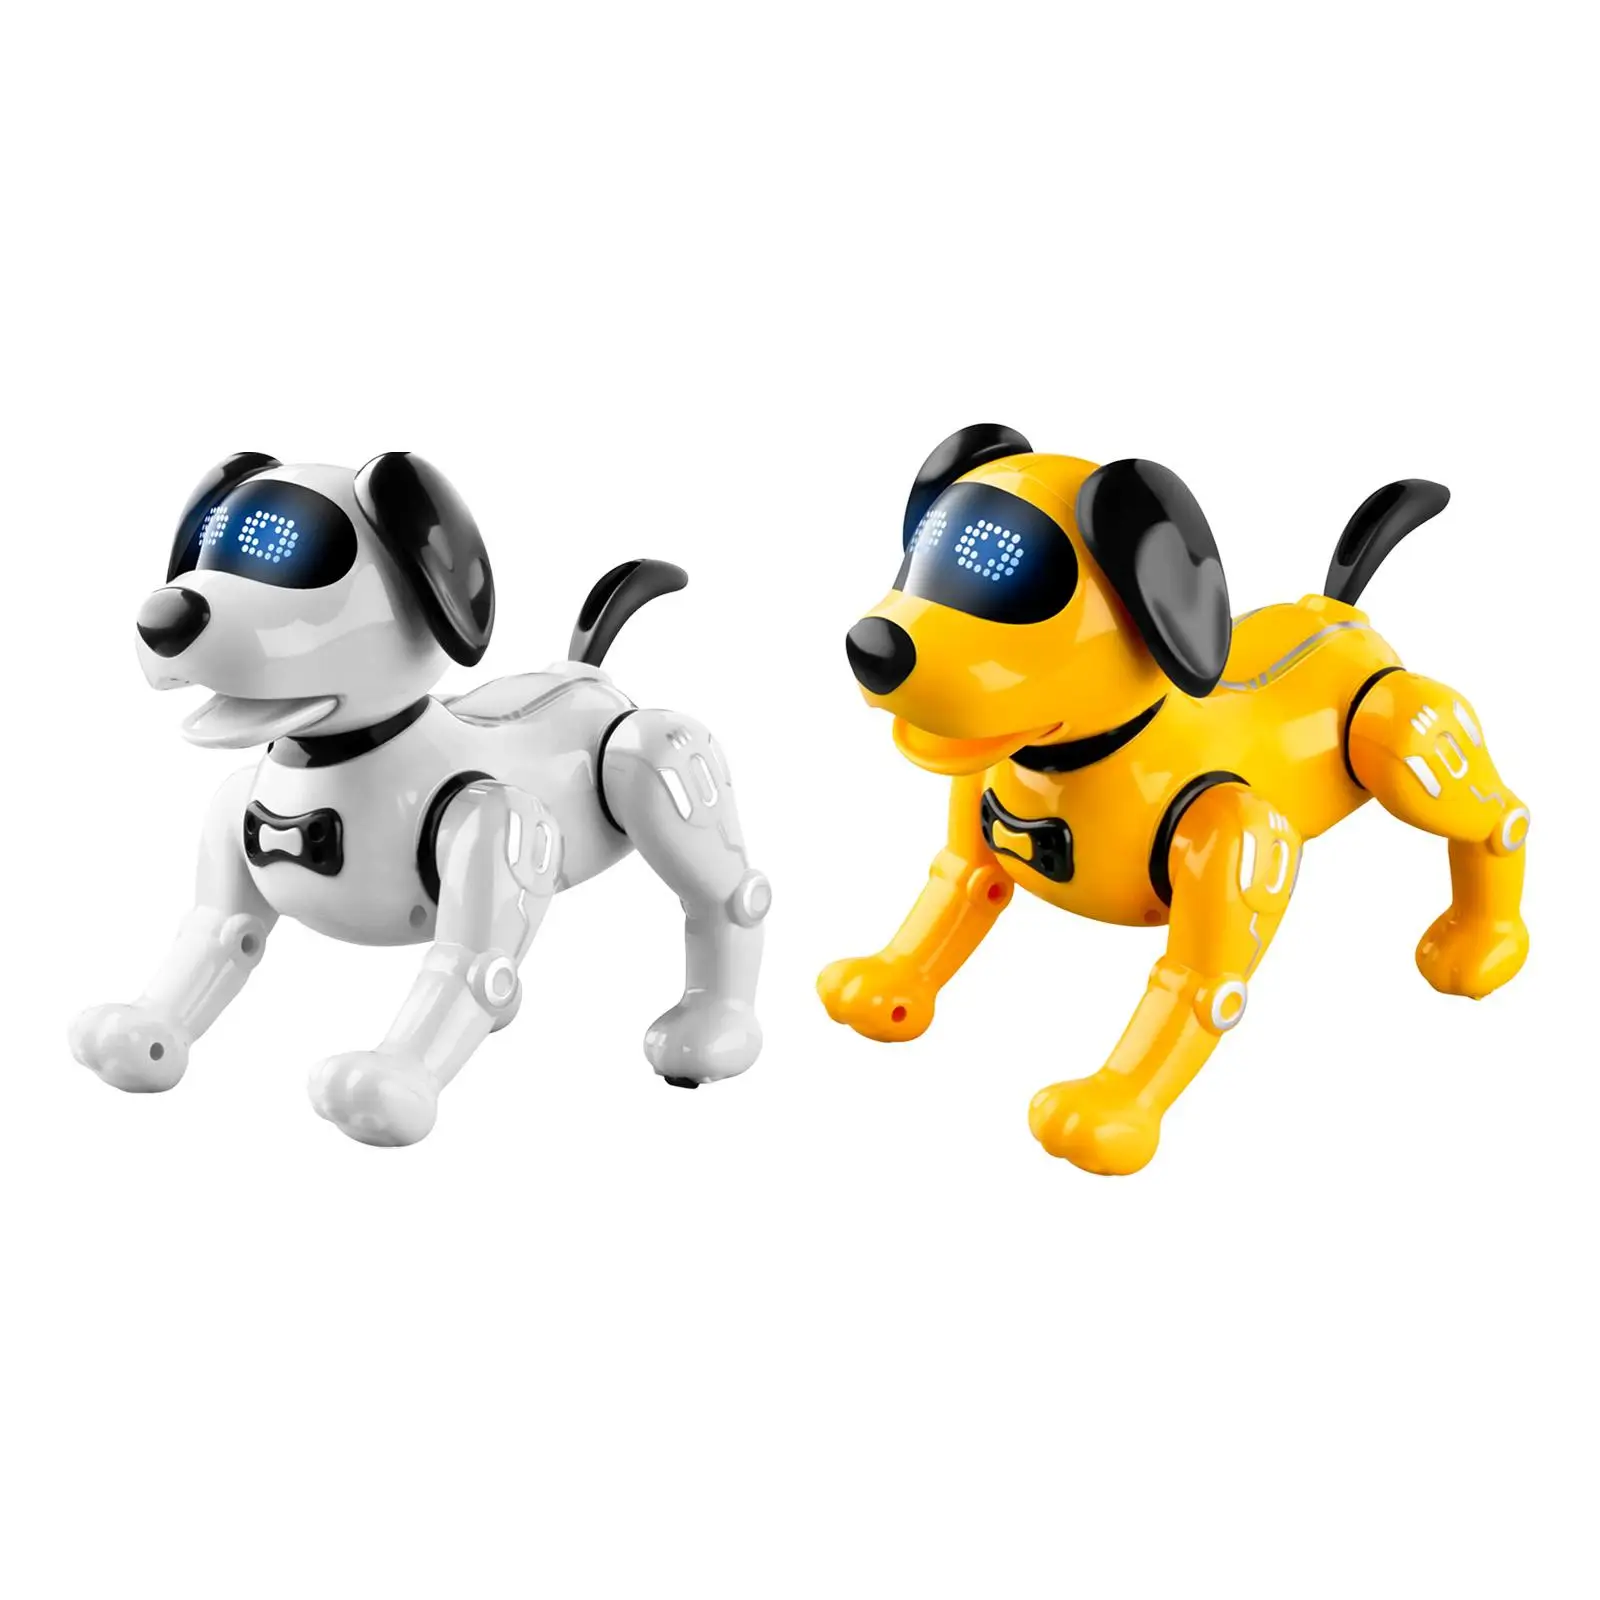 Remote Control Robot Dog Toy RC Toys Dancing Smart Dancing Robot Electronic Pet Stunt Puppy for Kids Boys and Girls Toddlers